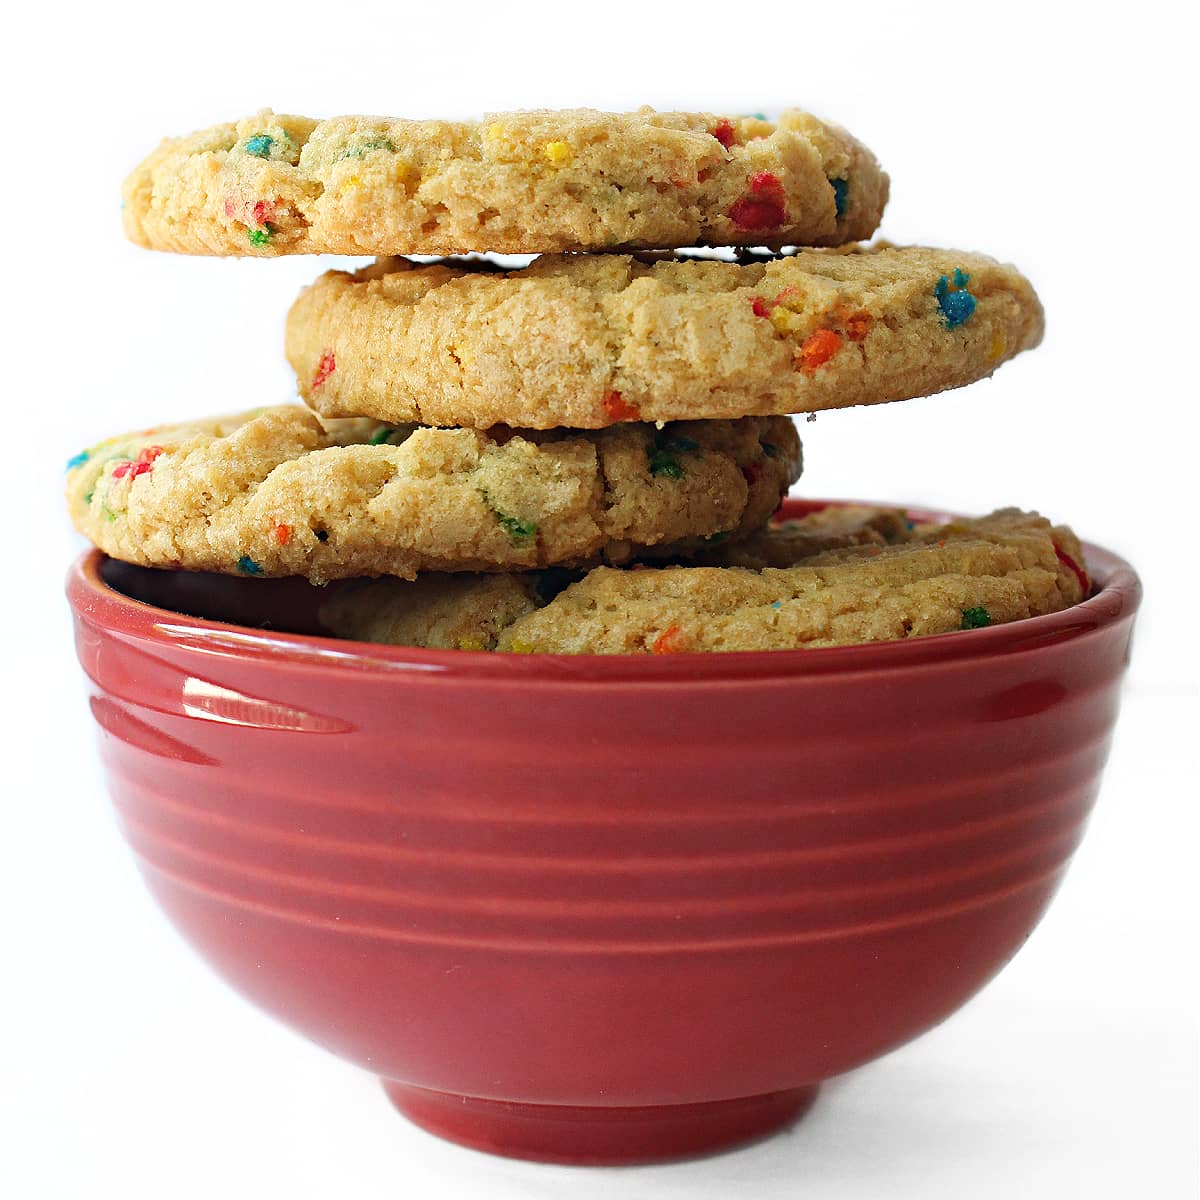 Funfetti Cookies stacked in a bowl showing the thick, rounded edges of the cookies.